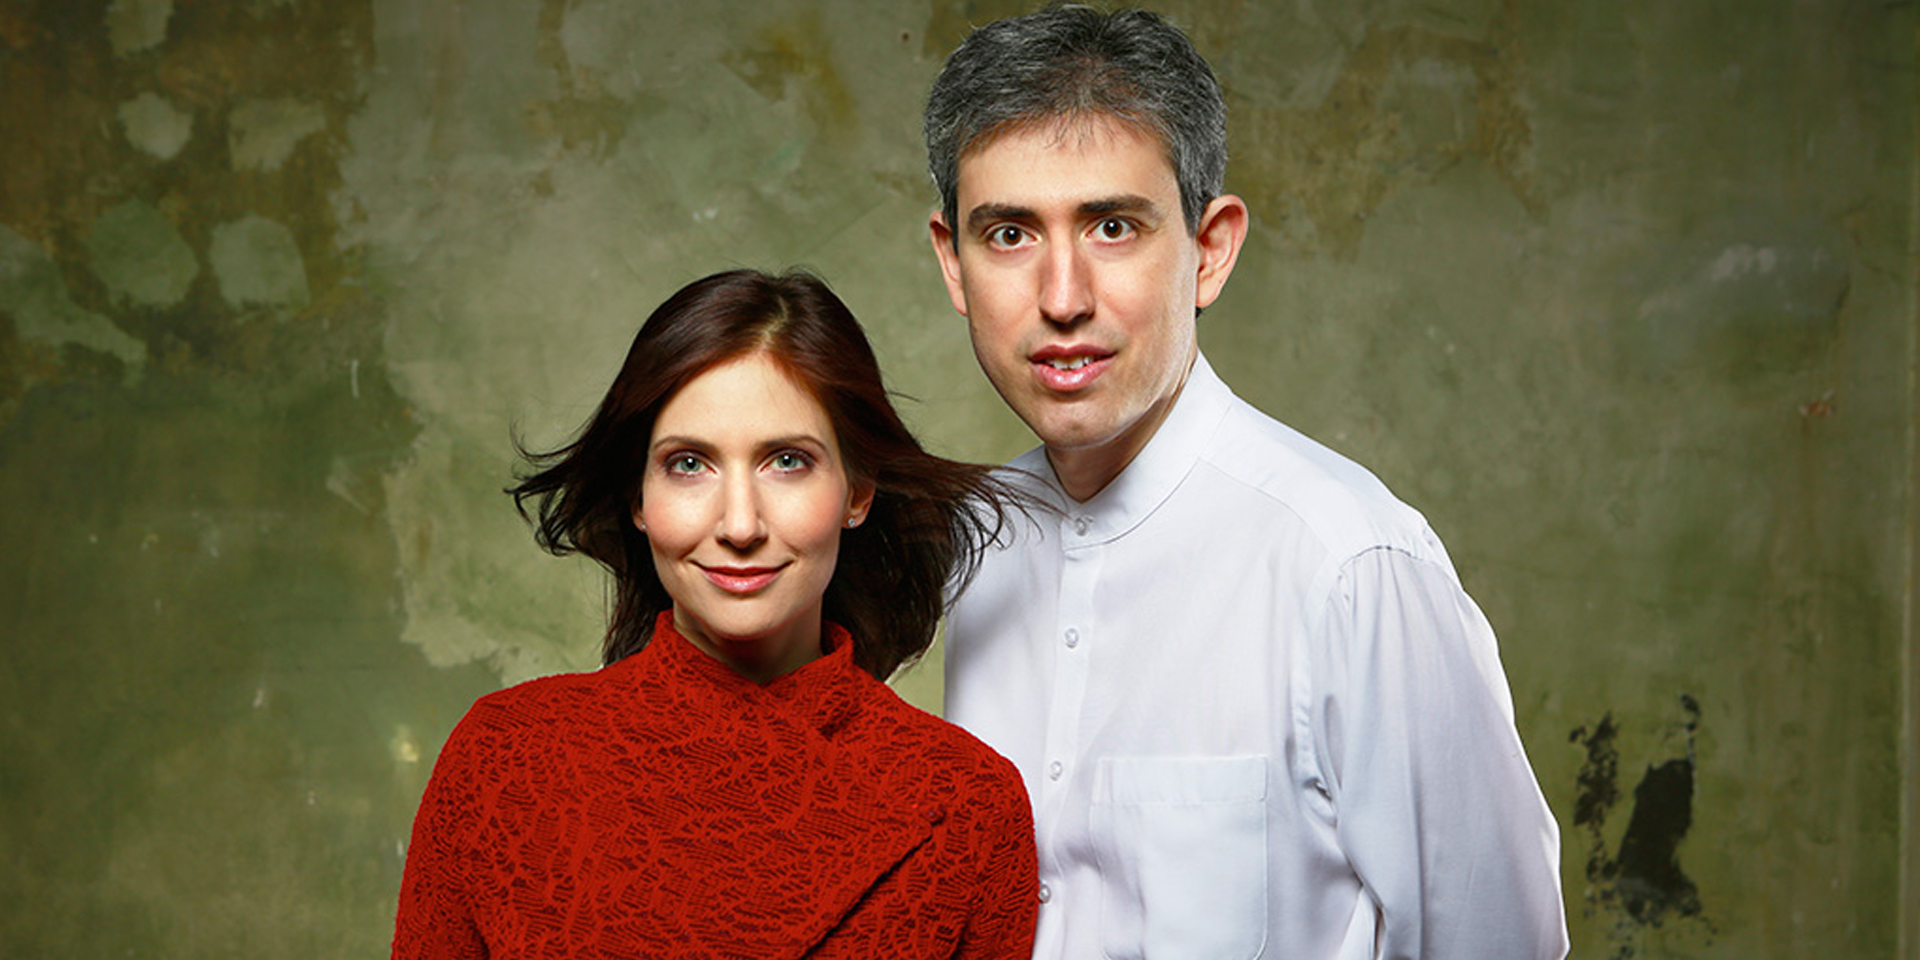 Portrait of Sivan Silver and Gil Garburg in red and white garments before a distressed wall.